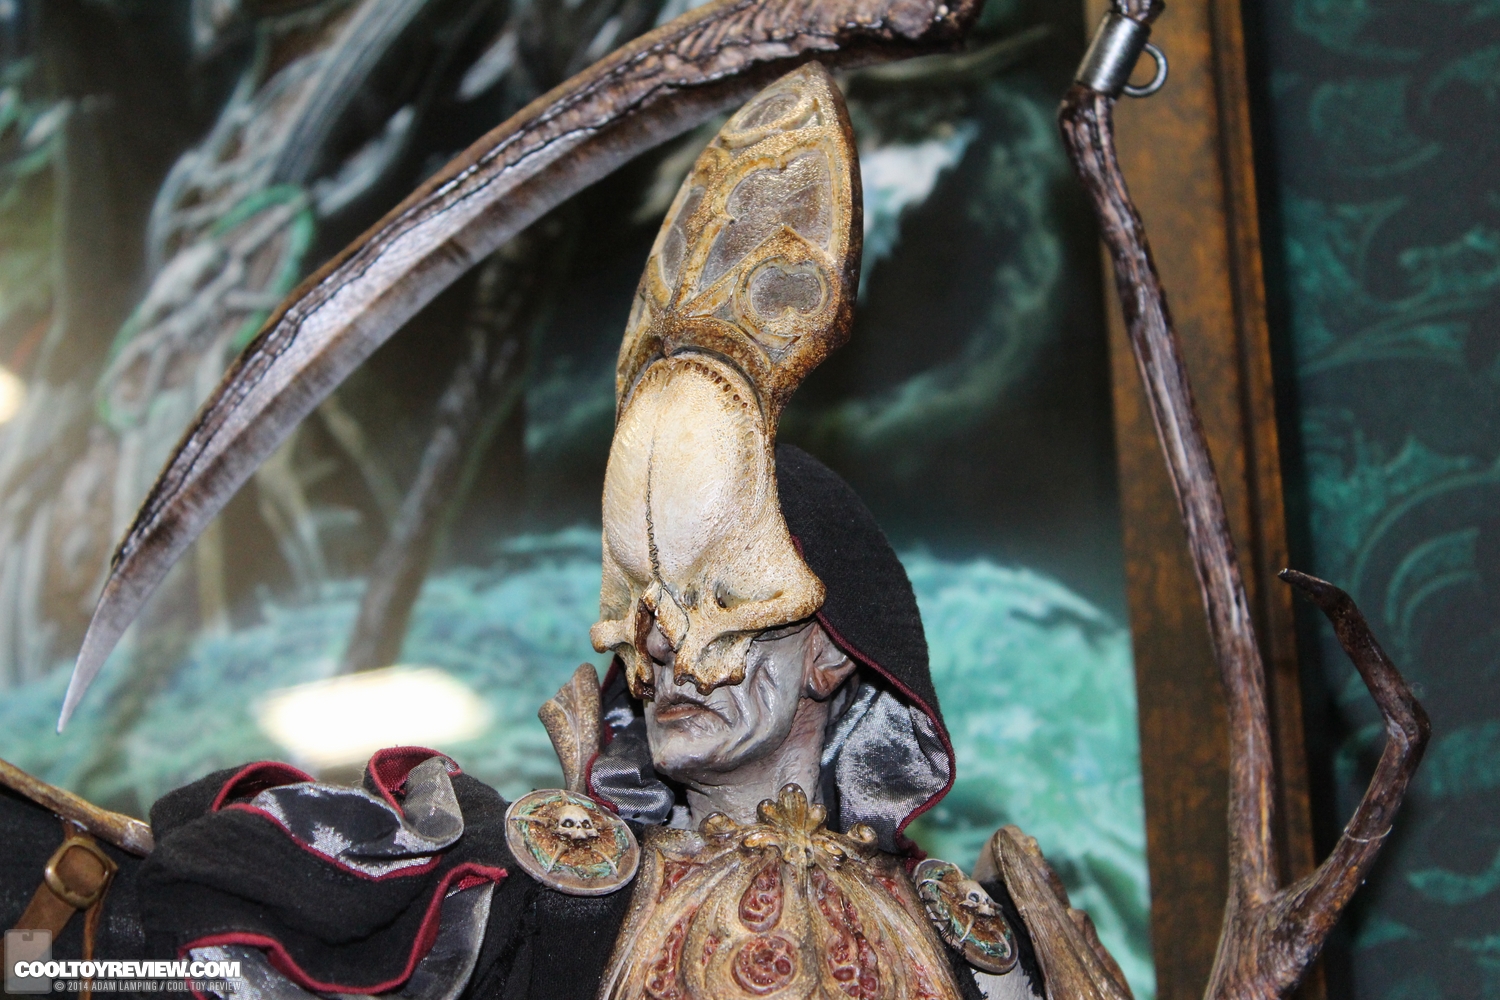 san-diego-comic-con-2014-sideshow-collectibles-court-of-the-dead-035.JPG